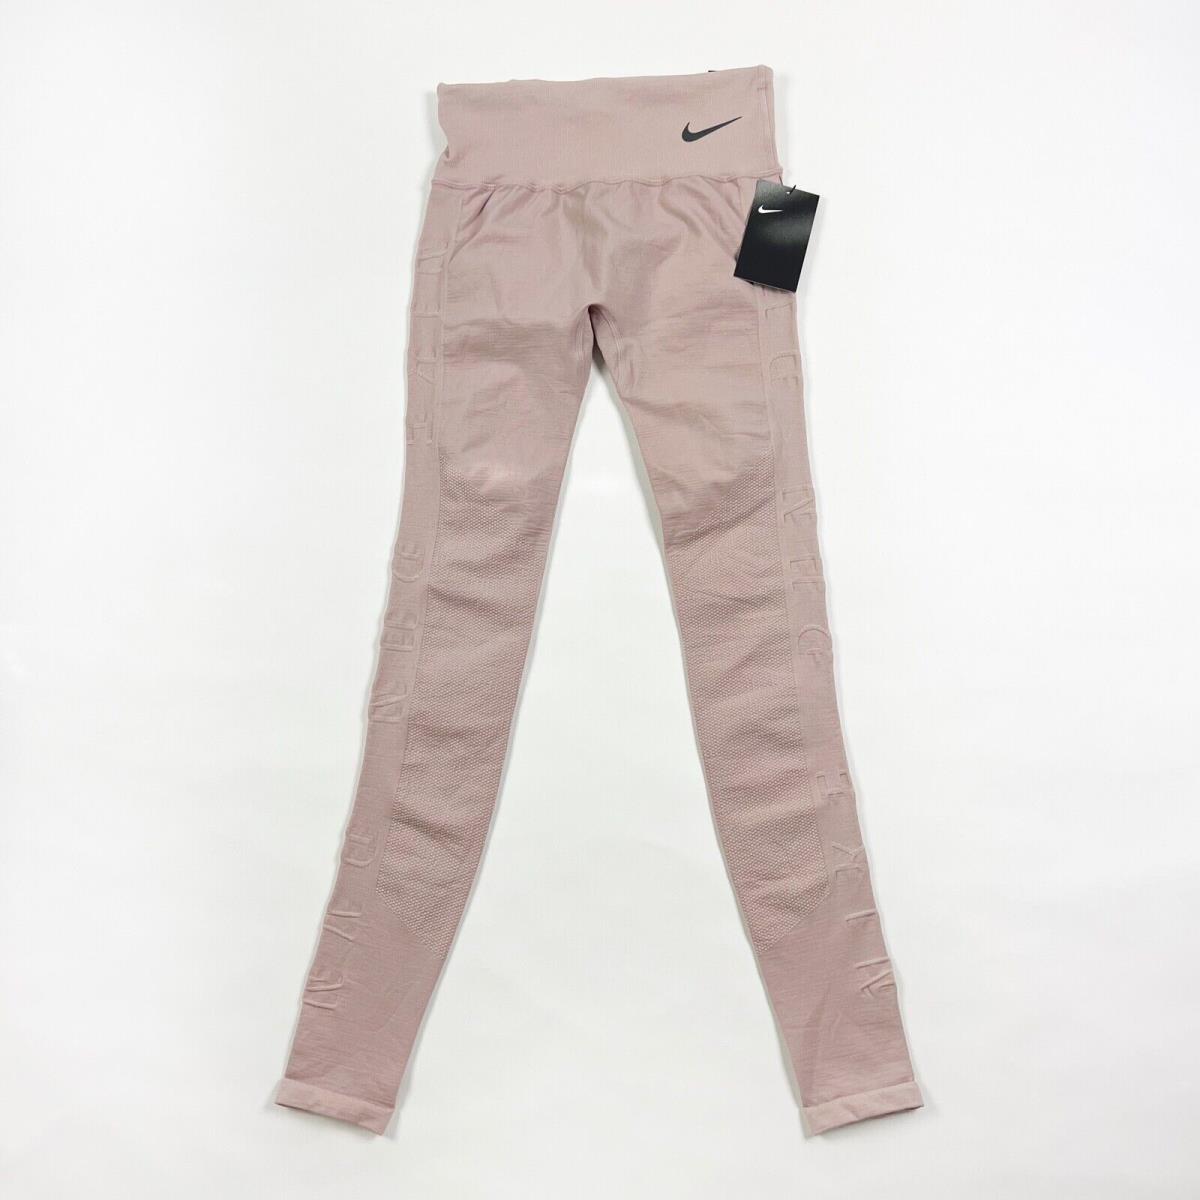 Nike Women`s Run Division Epic Lux Tight Fit High Rise Leggings Pants Pink S